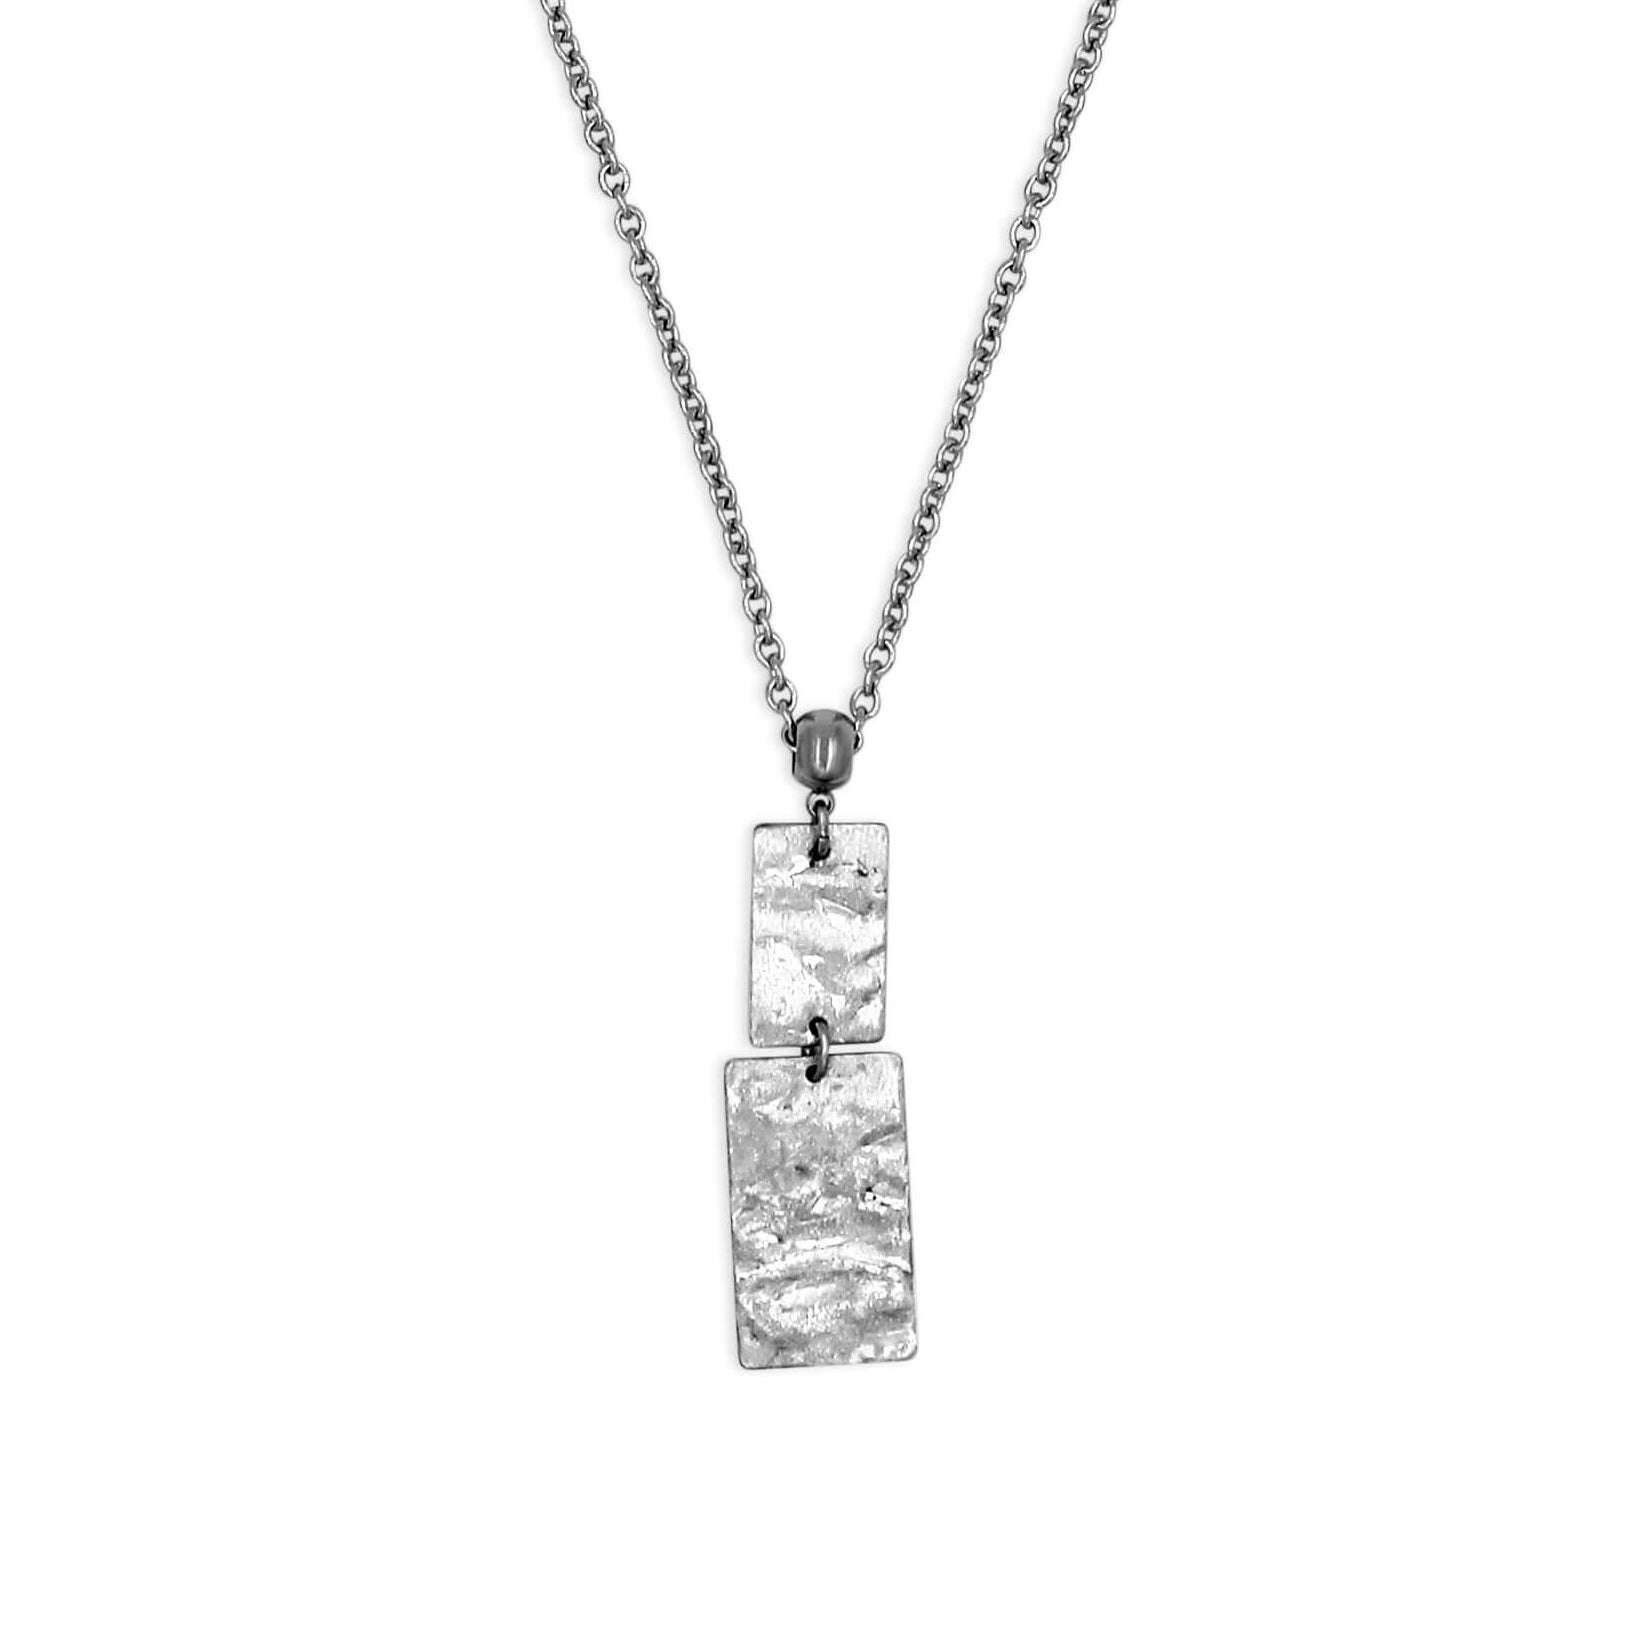 Silver Rectangle Long Pendant Necklace - Creative Jewelry by Marcia - Asymmetrical Jewelry - Timeless Jewelry